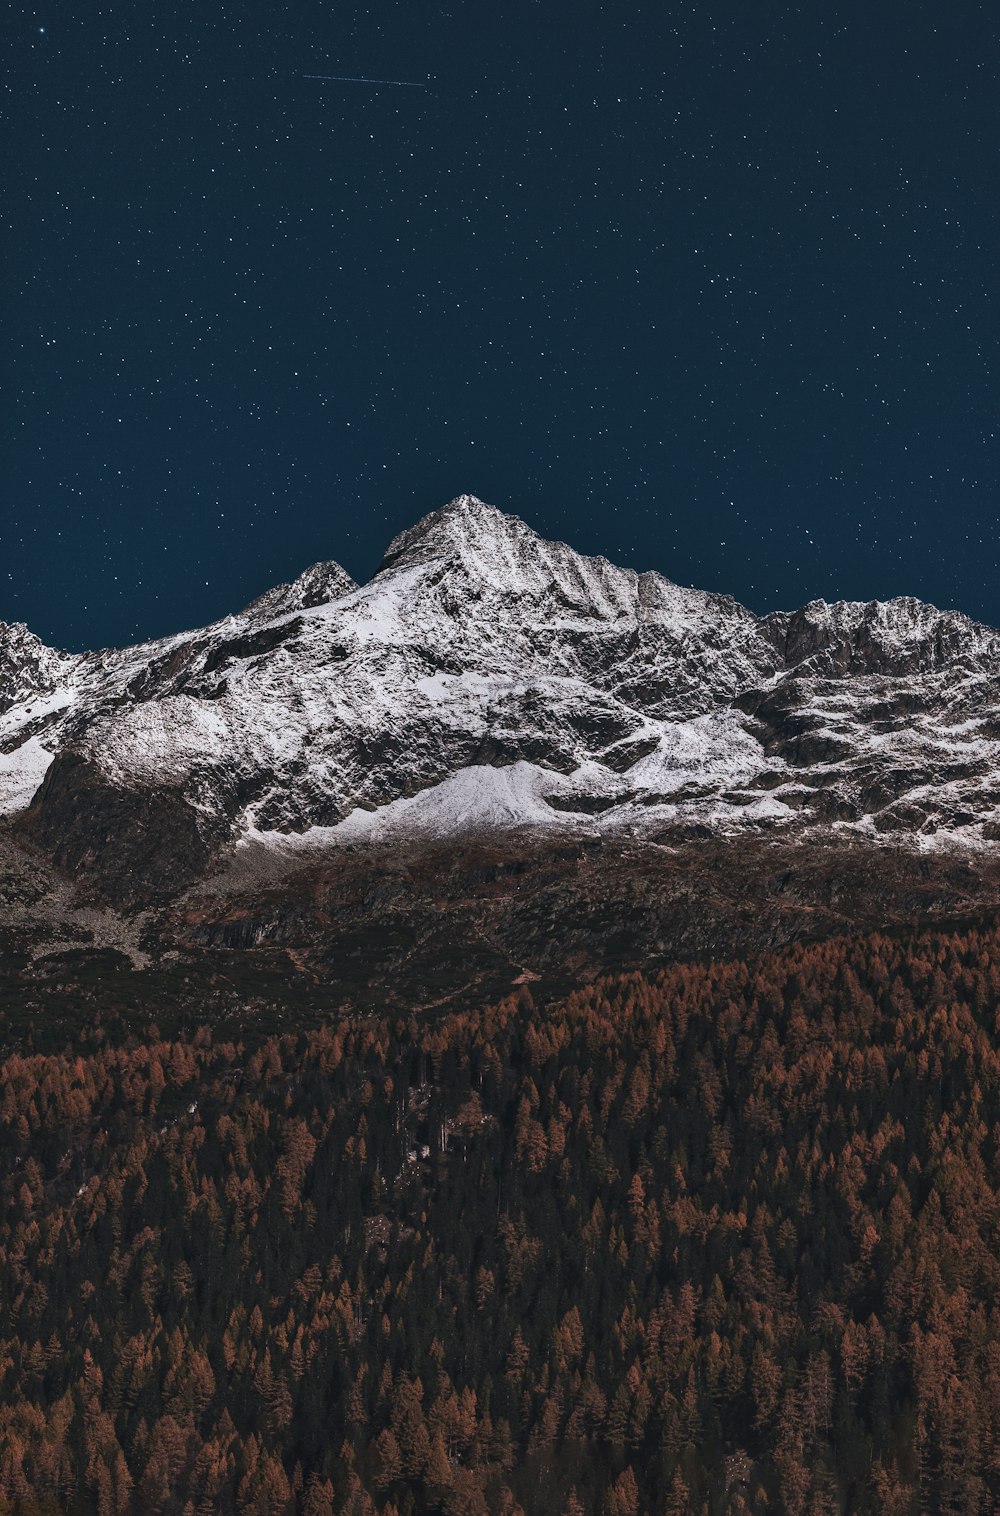 ice-capped mountain at night